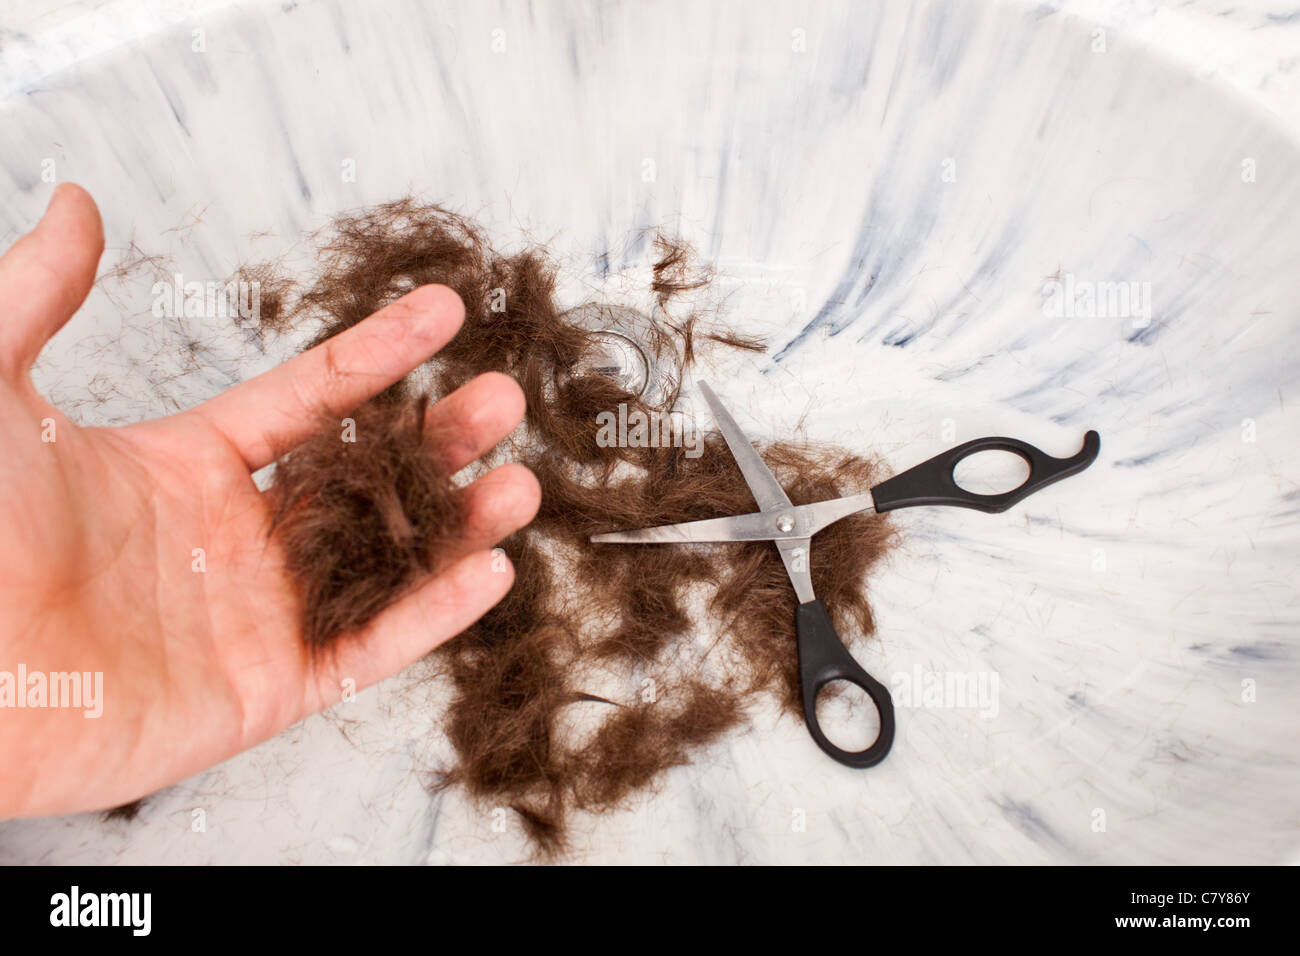 Hand holding hair after a self haircut Stock Photo